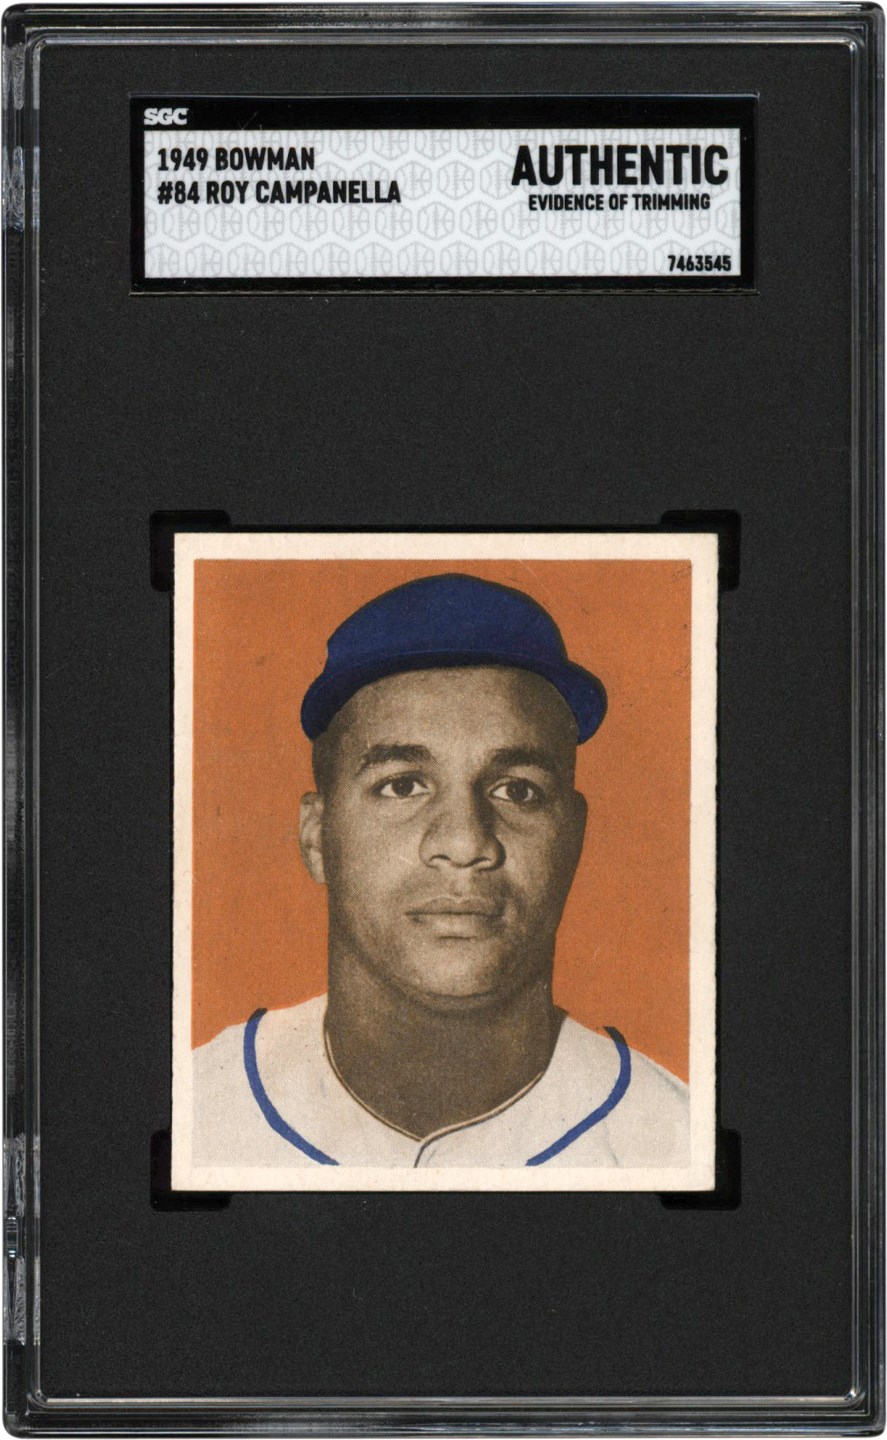 Baseball and Trading Cards - 1949 Bowman #84 Roy Campanella Rookie Card SGC Authentic